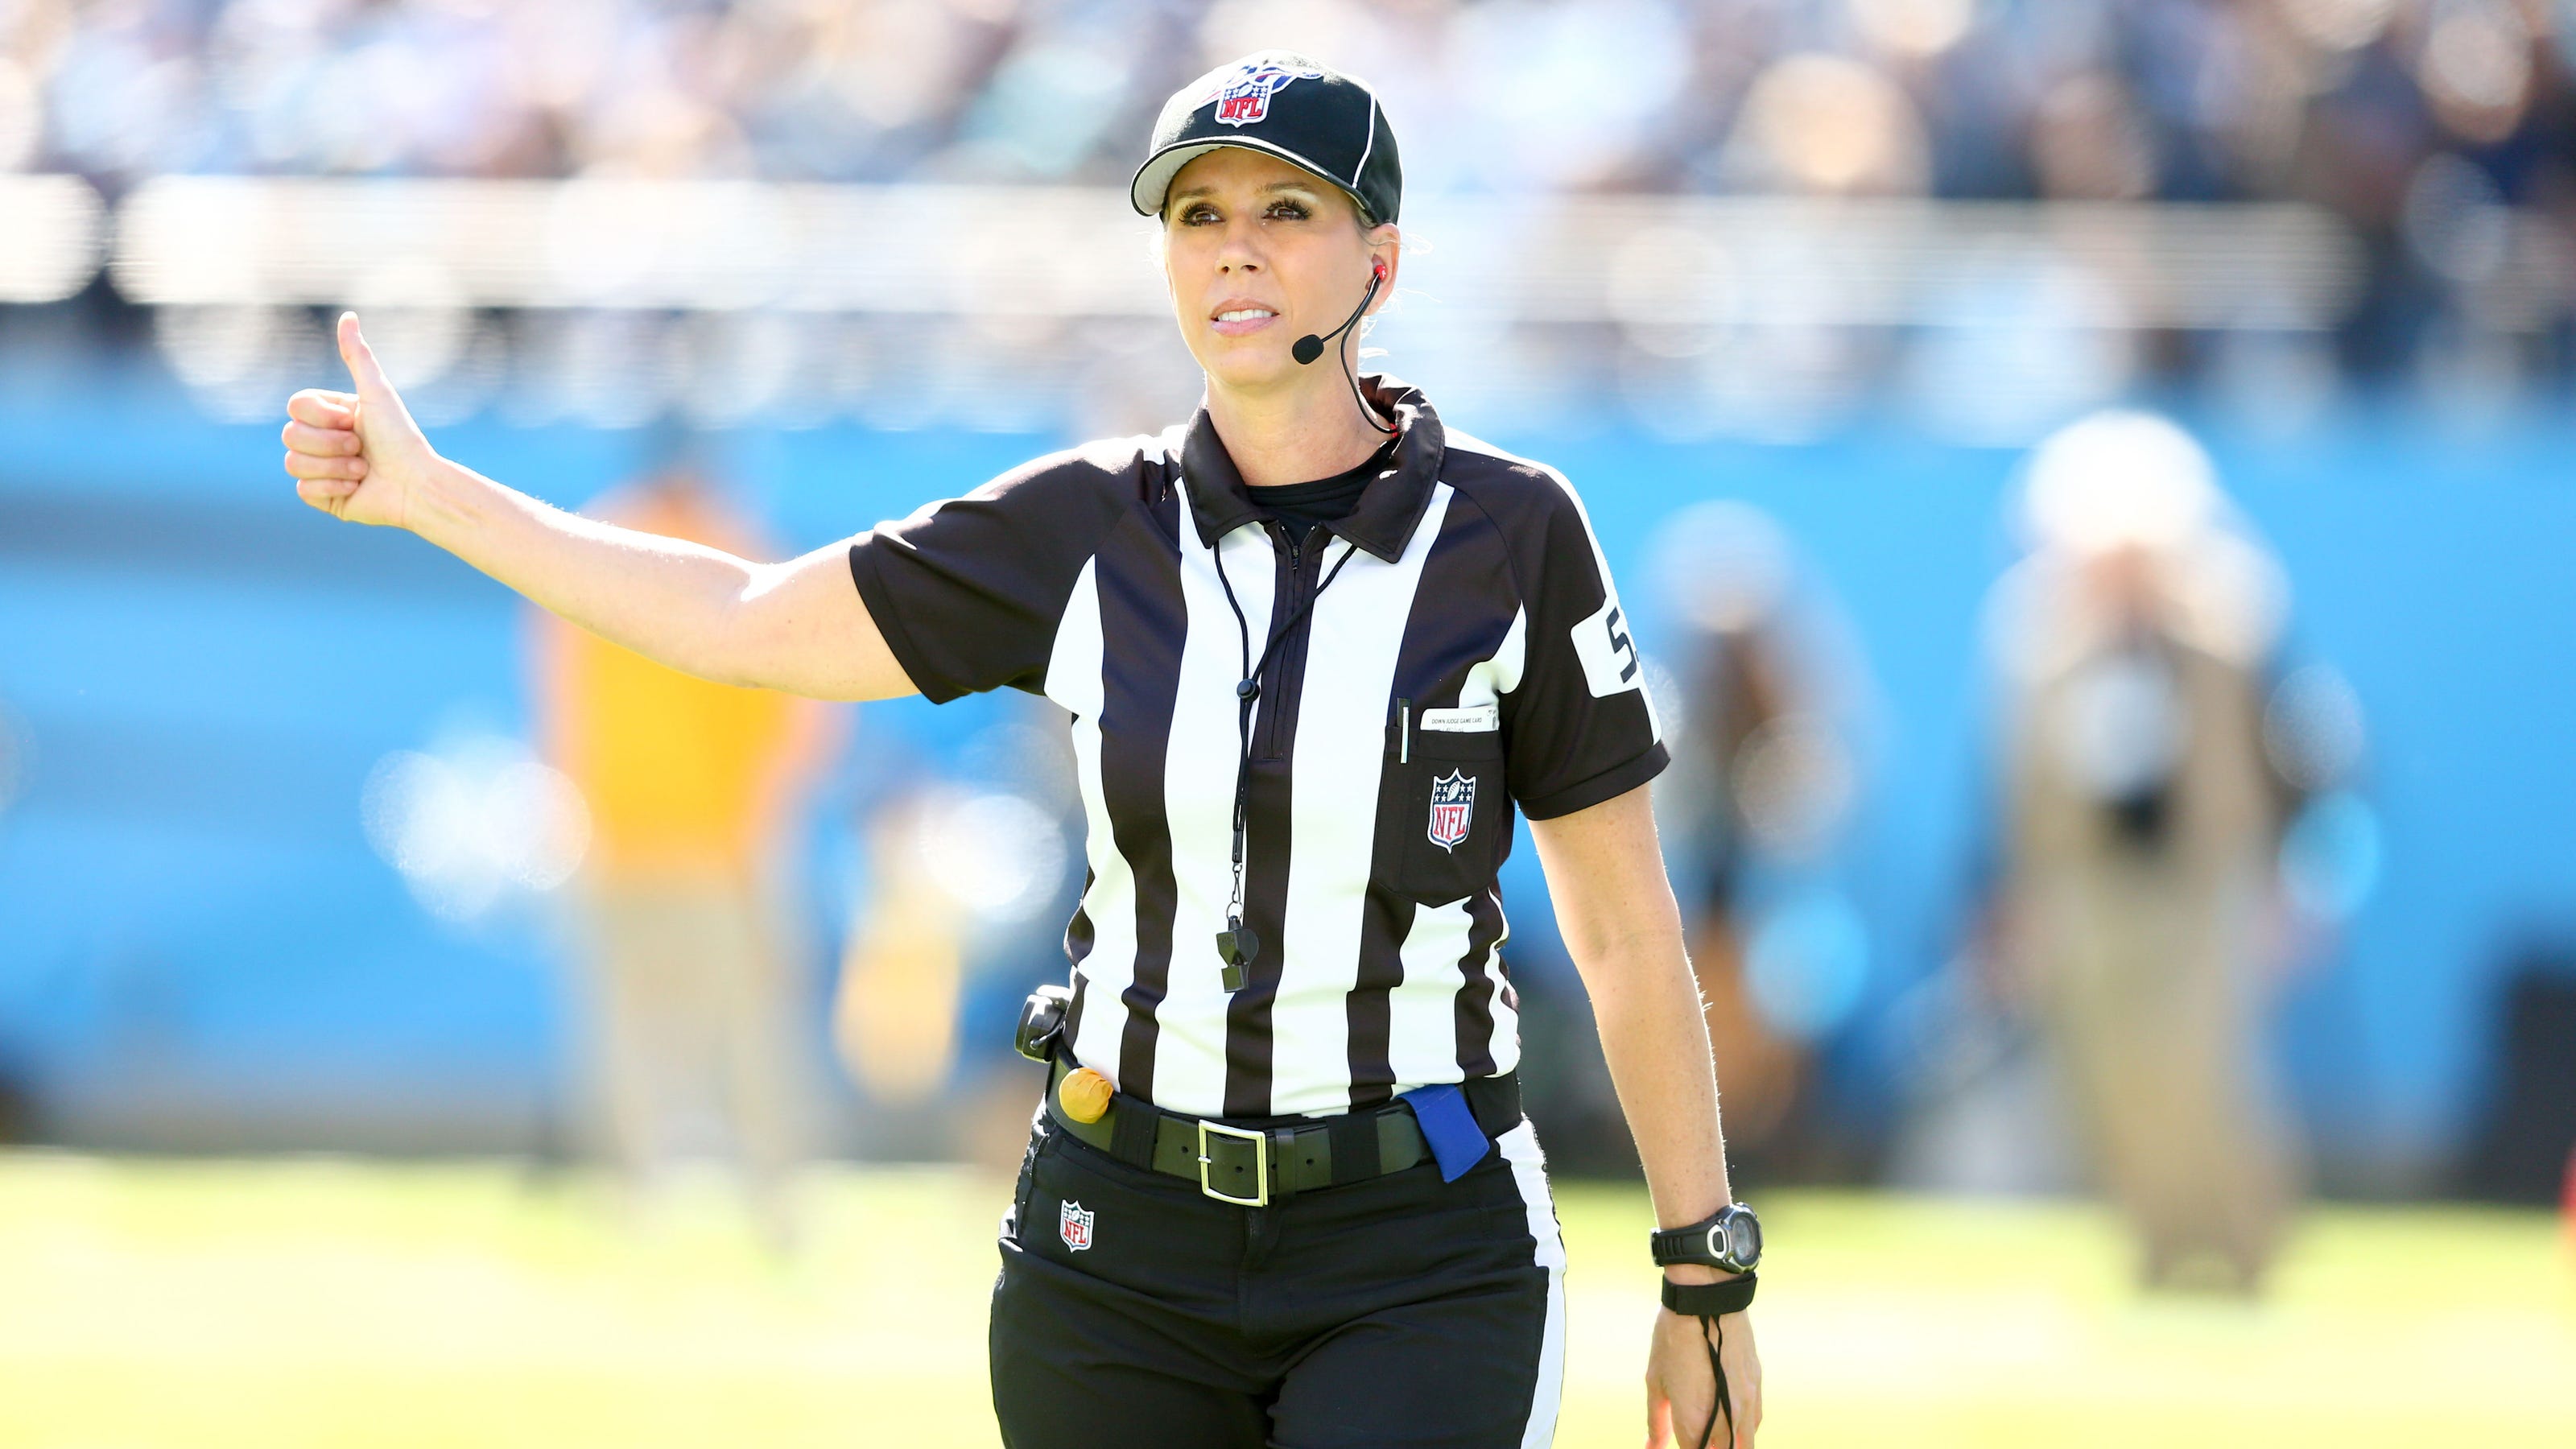 Sarah Thomas First Female Official In A Super Bowl Clearing Way For Others